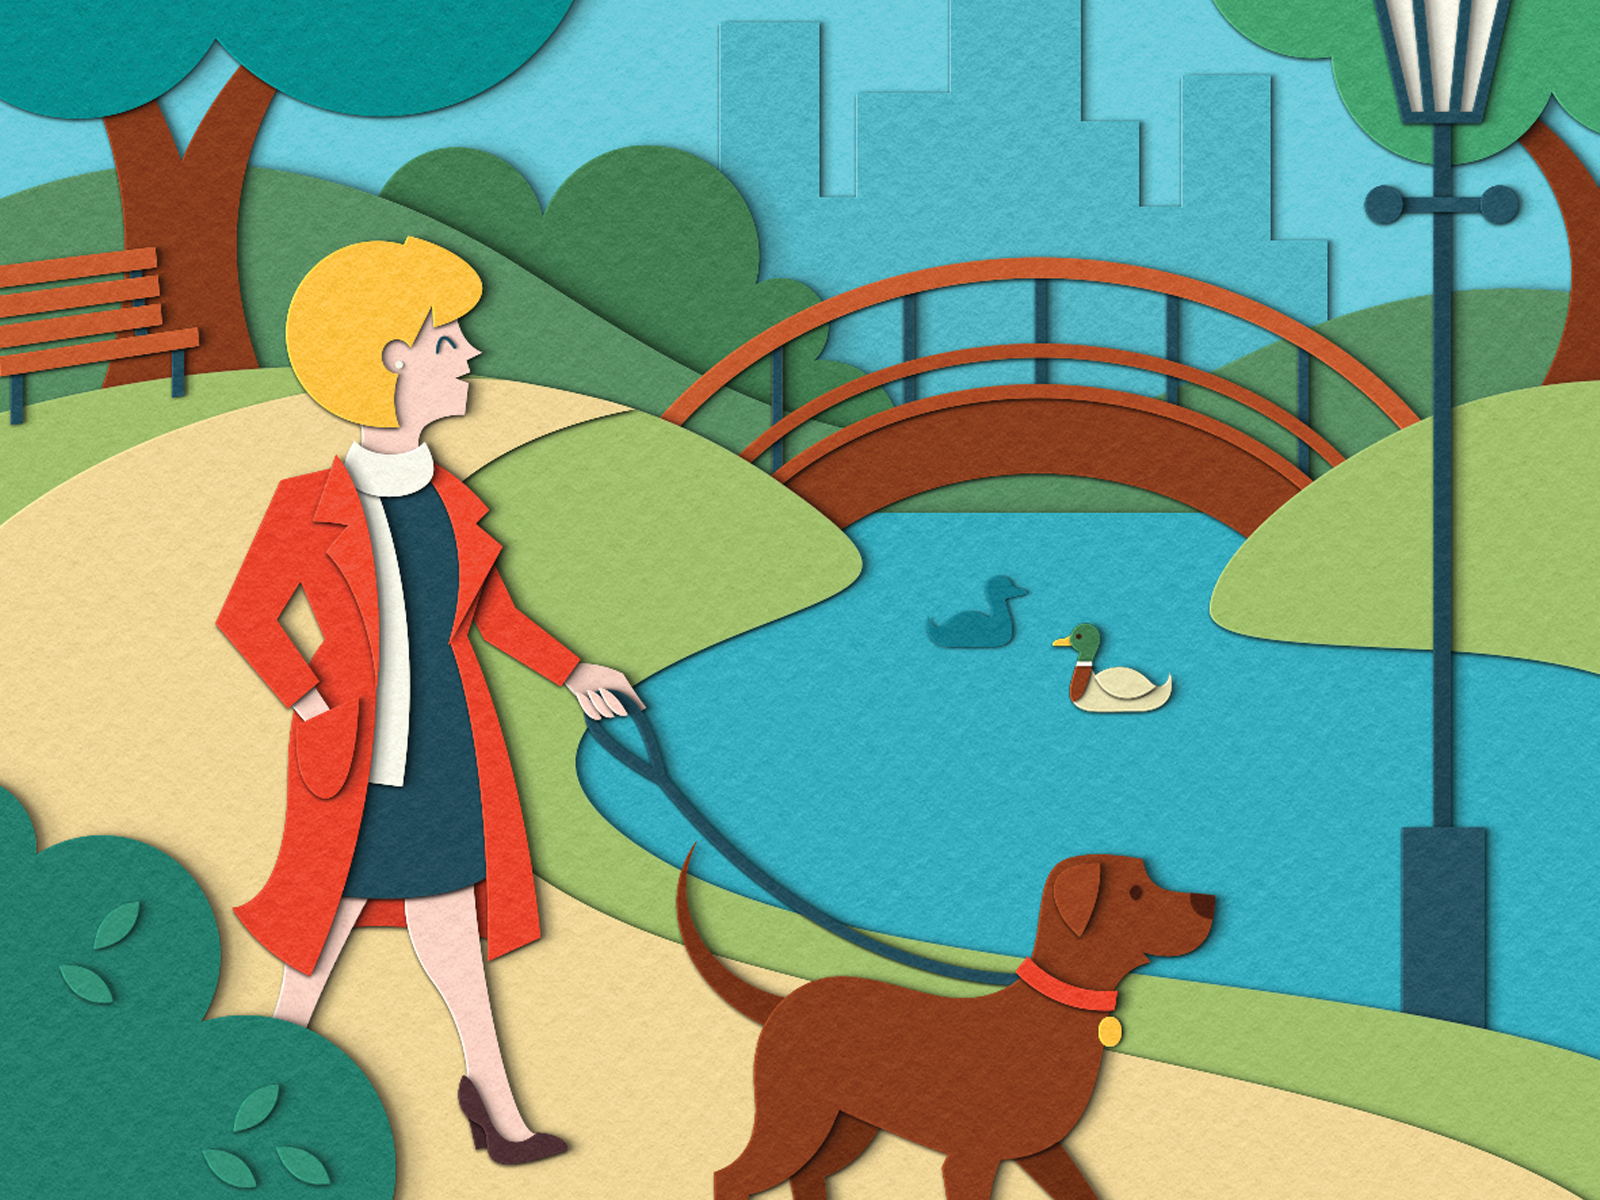 Dog Walking in the Park. It’s a walk in the Park. Comic: a walk in the Park. You can walk with your Dog in the Park. The dog likes the park